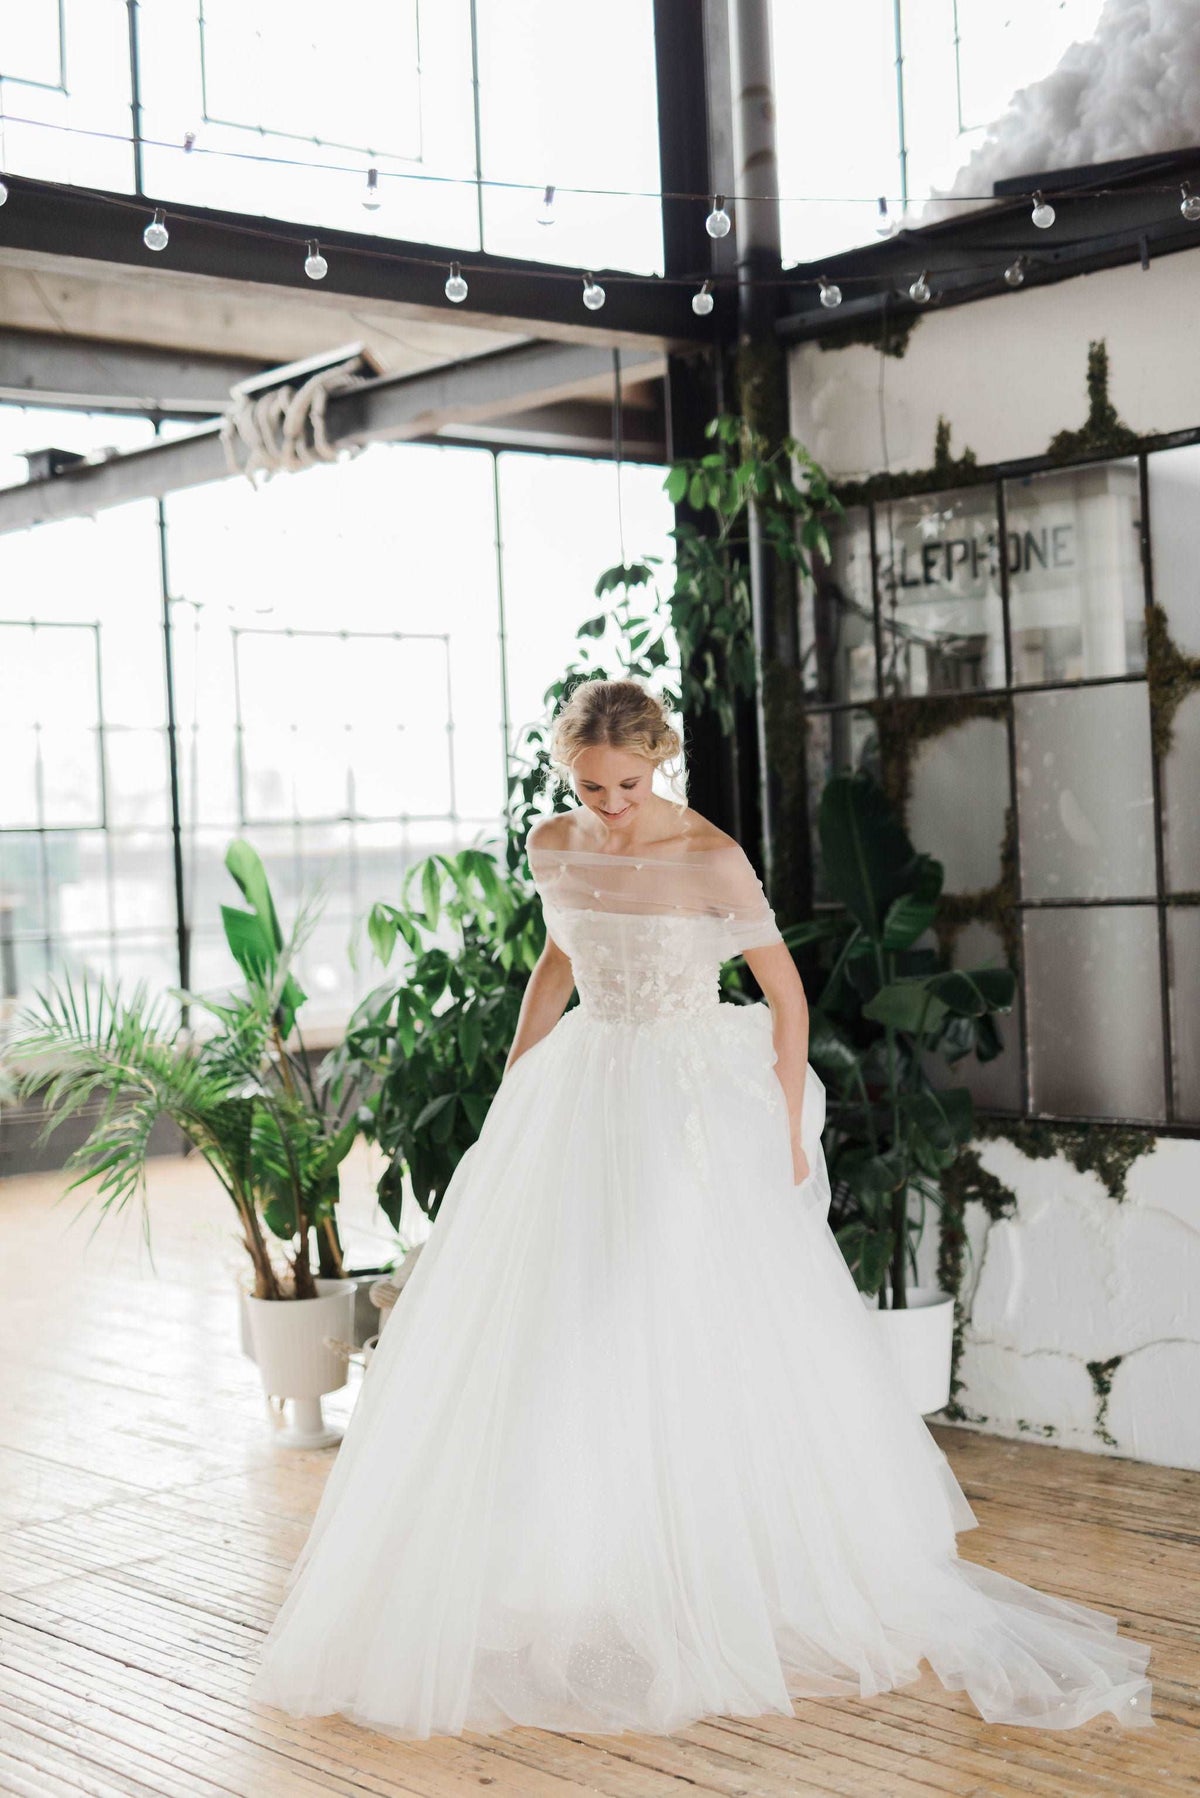 Be a modern princess in the beaded tulle Destiny wedding dress. Couture bespoke wedding gowns handmade in Canada by Catherine Langlois bridal. Visit our Toronto bridal boutique for your personalized wedding gown.